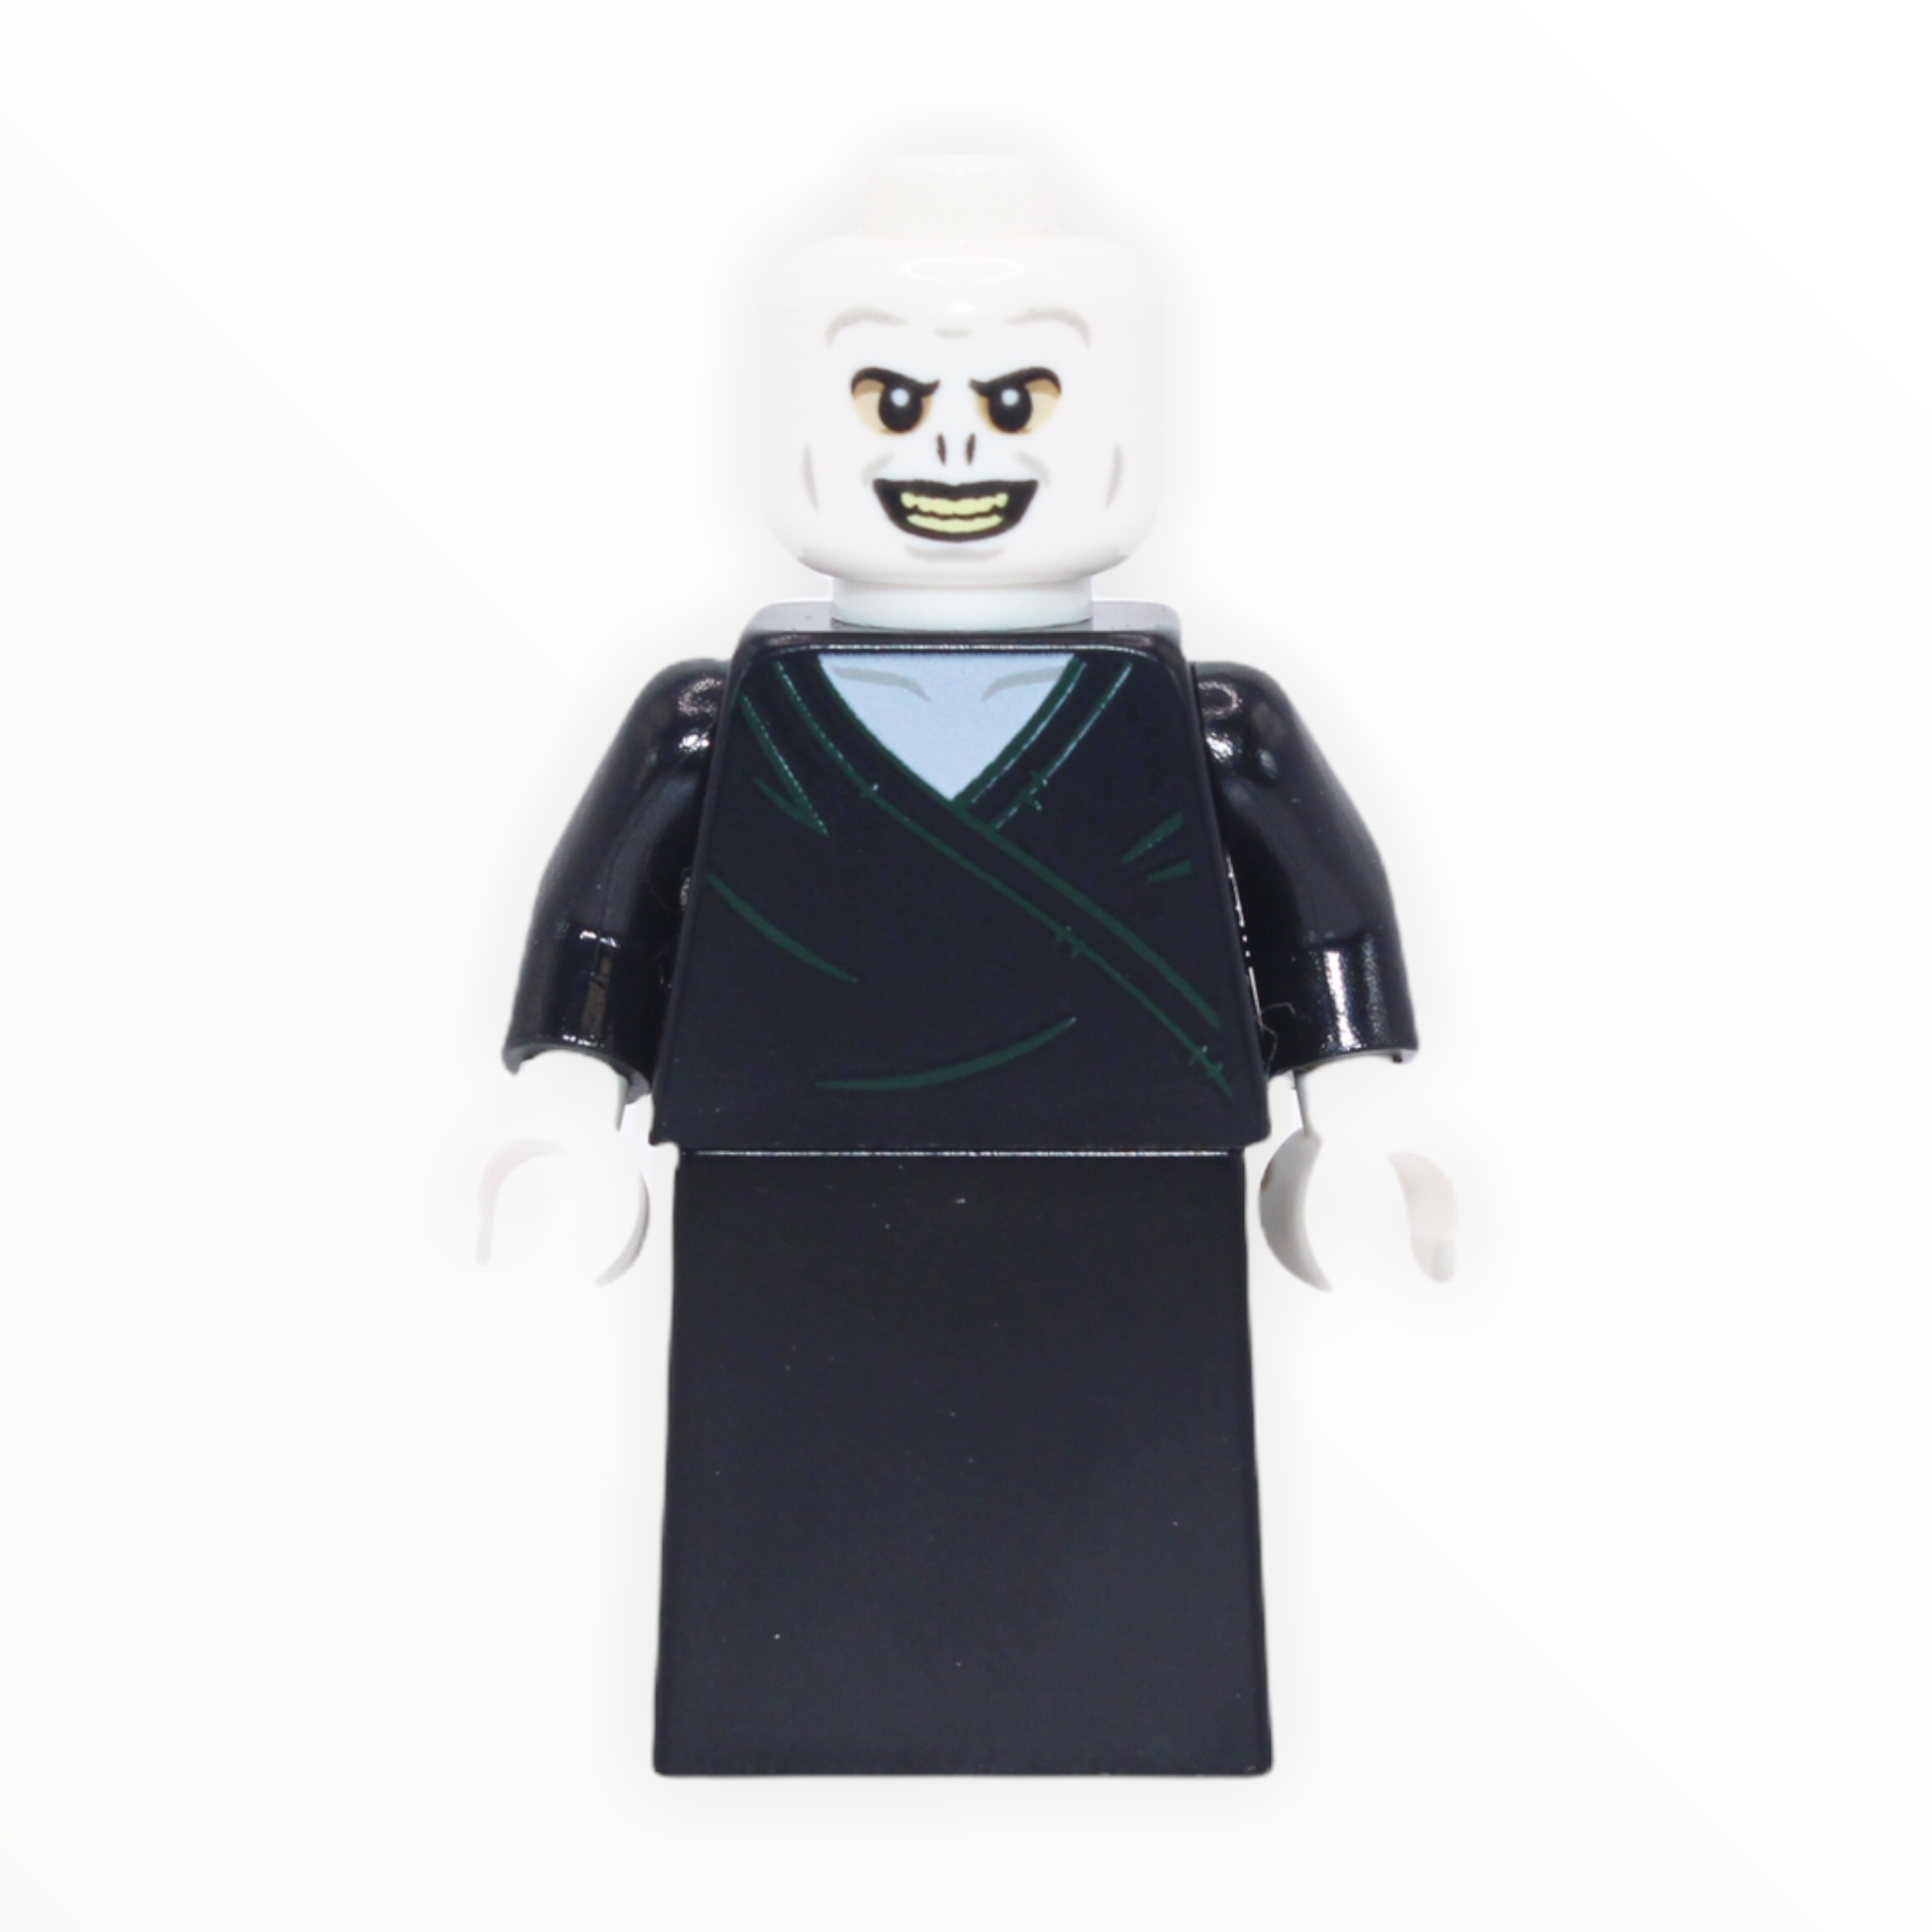 Voldemort (dress piece, nose slits, smile with teeth, 2019)